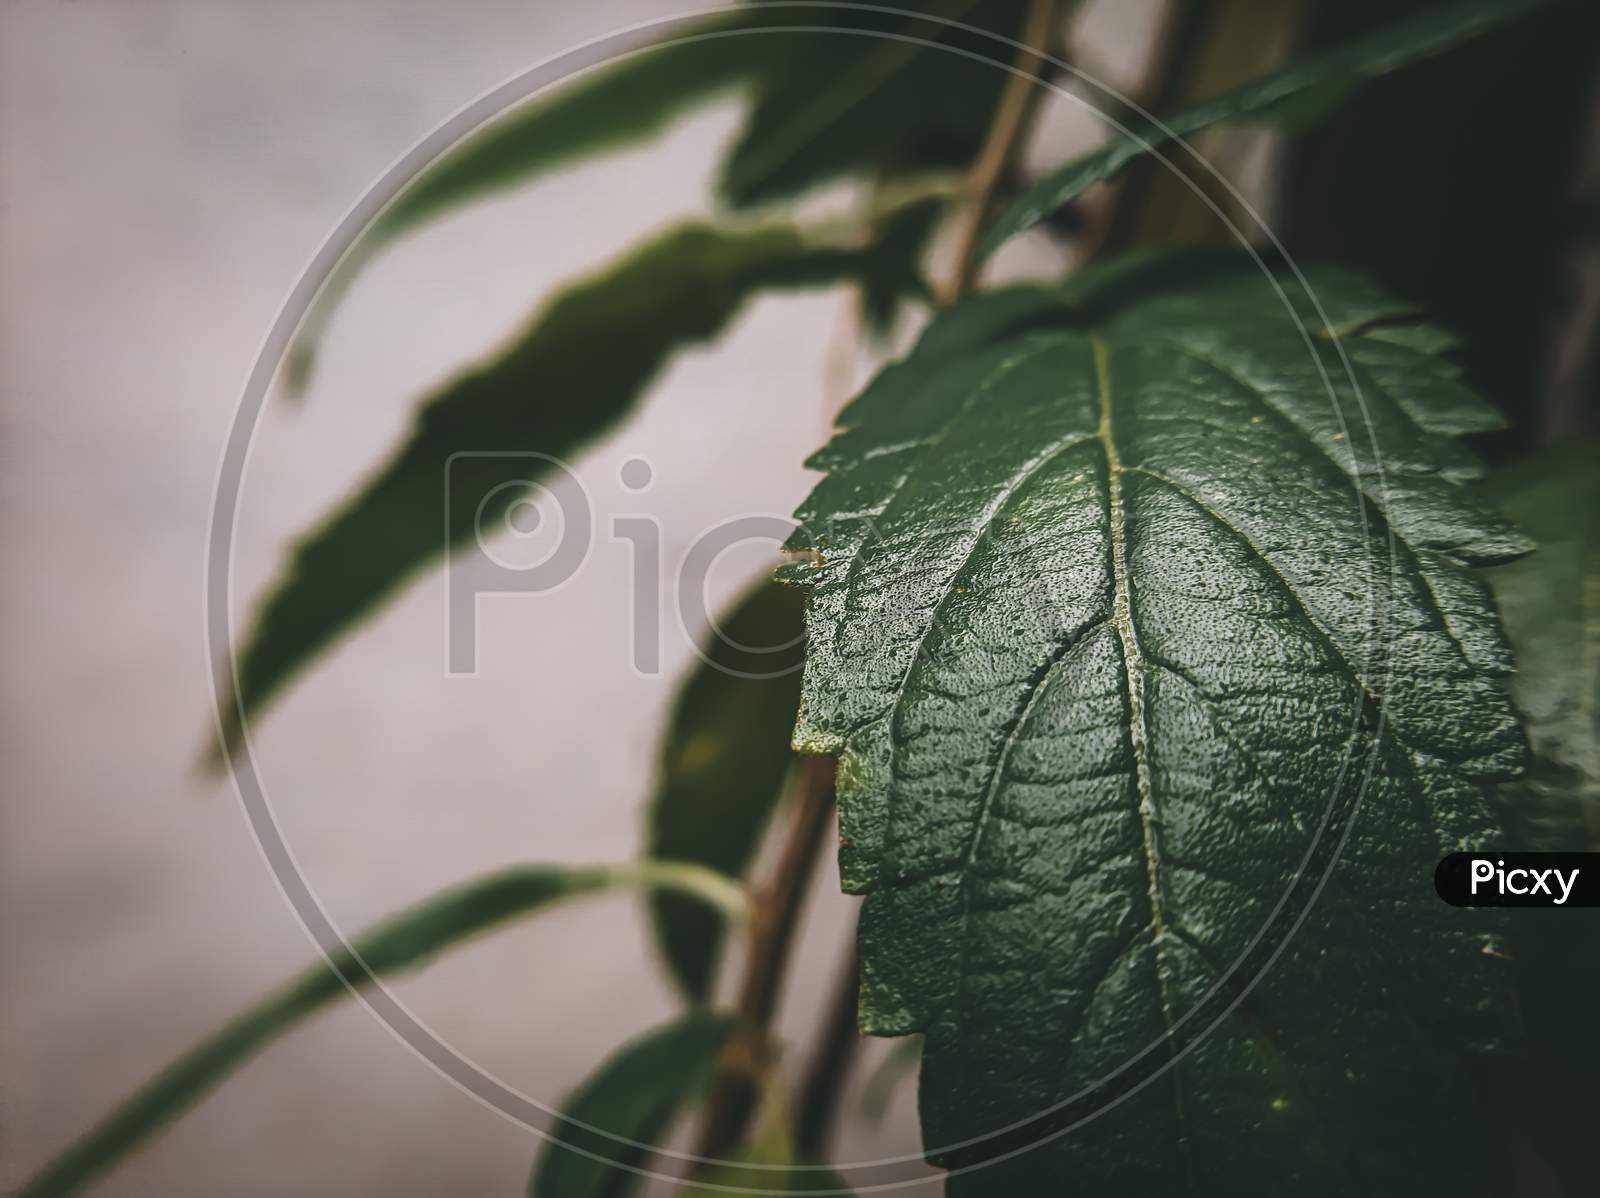 Nature's photography focusing details of leaf by macro lens.